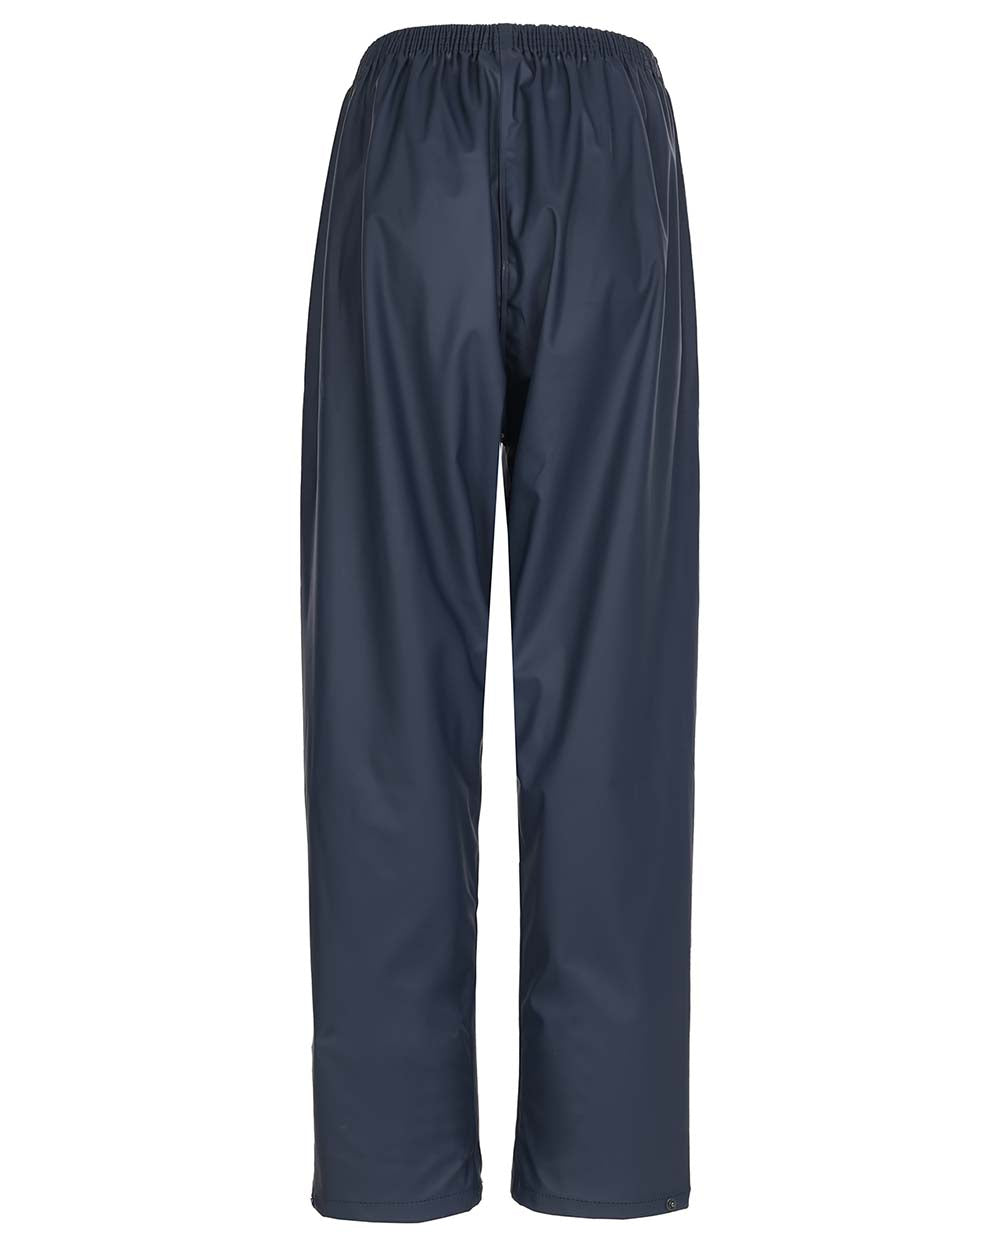 Navy Coloured Fort Airflex Waterproof Breathable Trousers On A White Background 